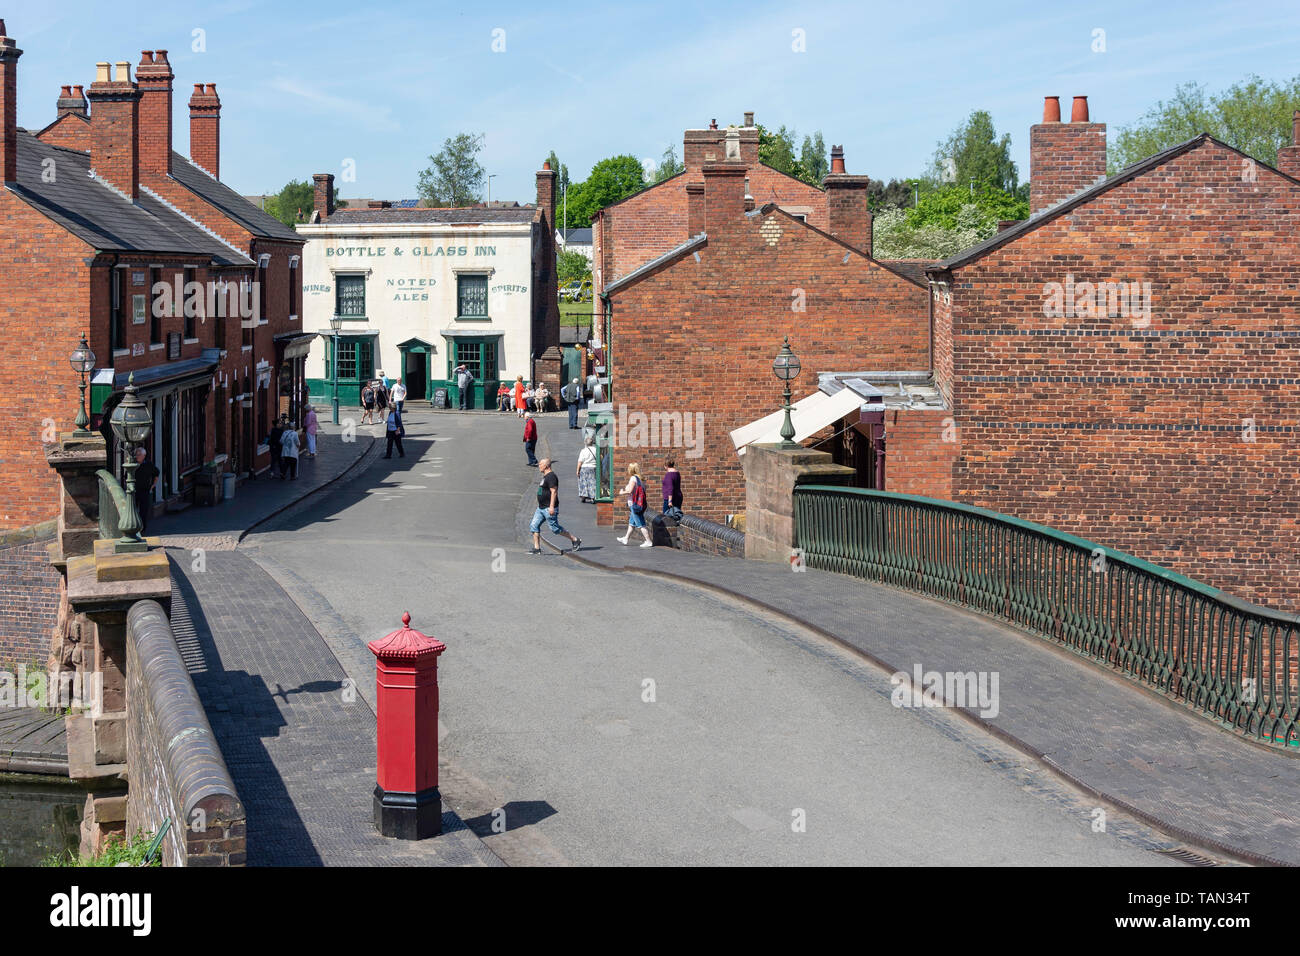 Canal Street Bridge, Canal Street, Black Country Living Museum, Dudley, West Midlands, England, Regno Unito Foto Stock